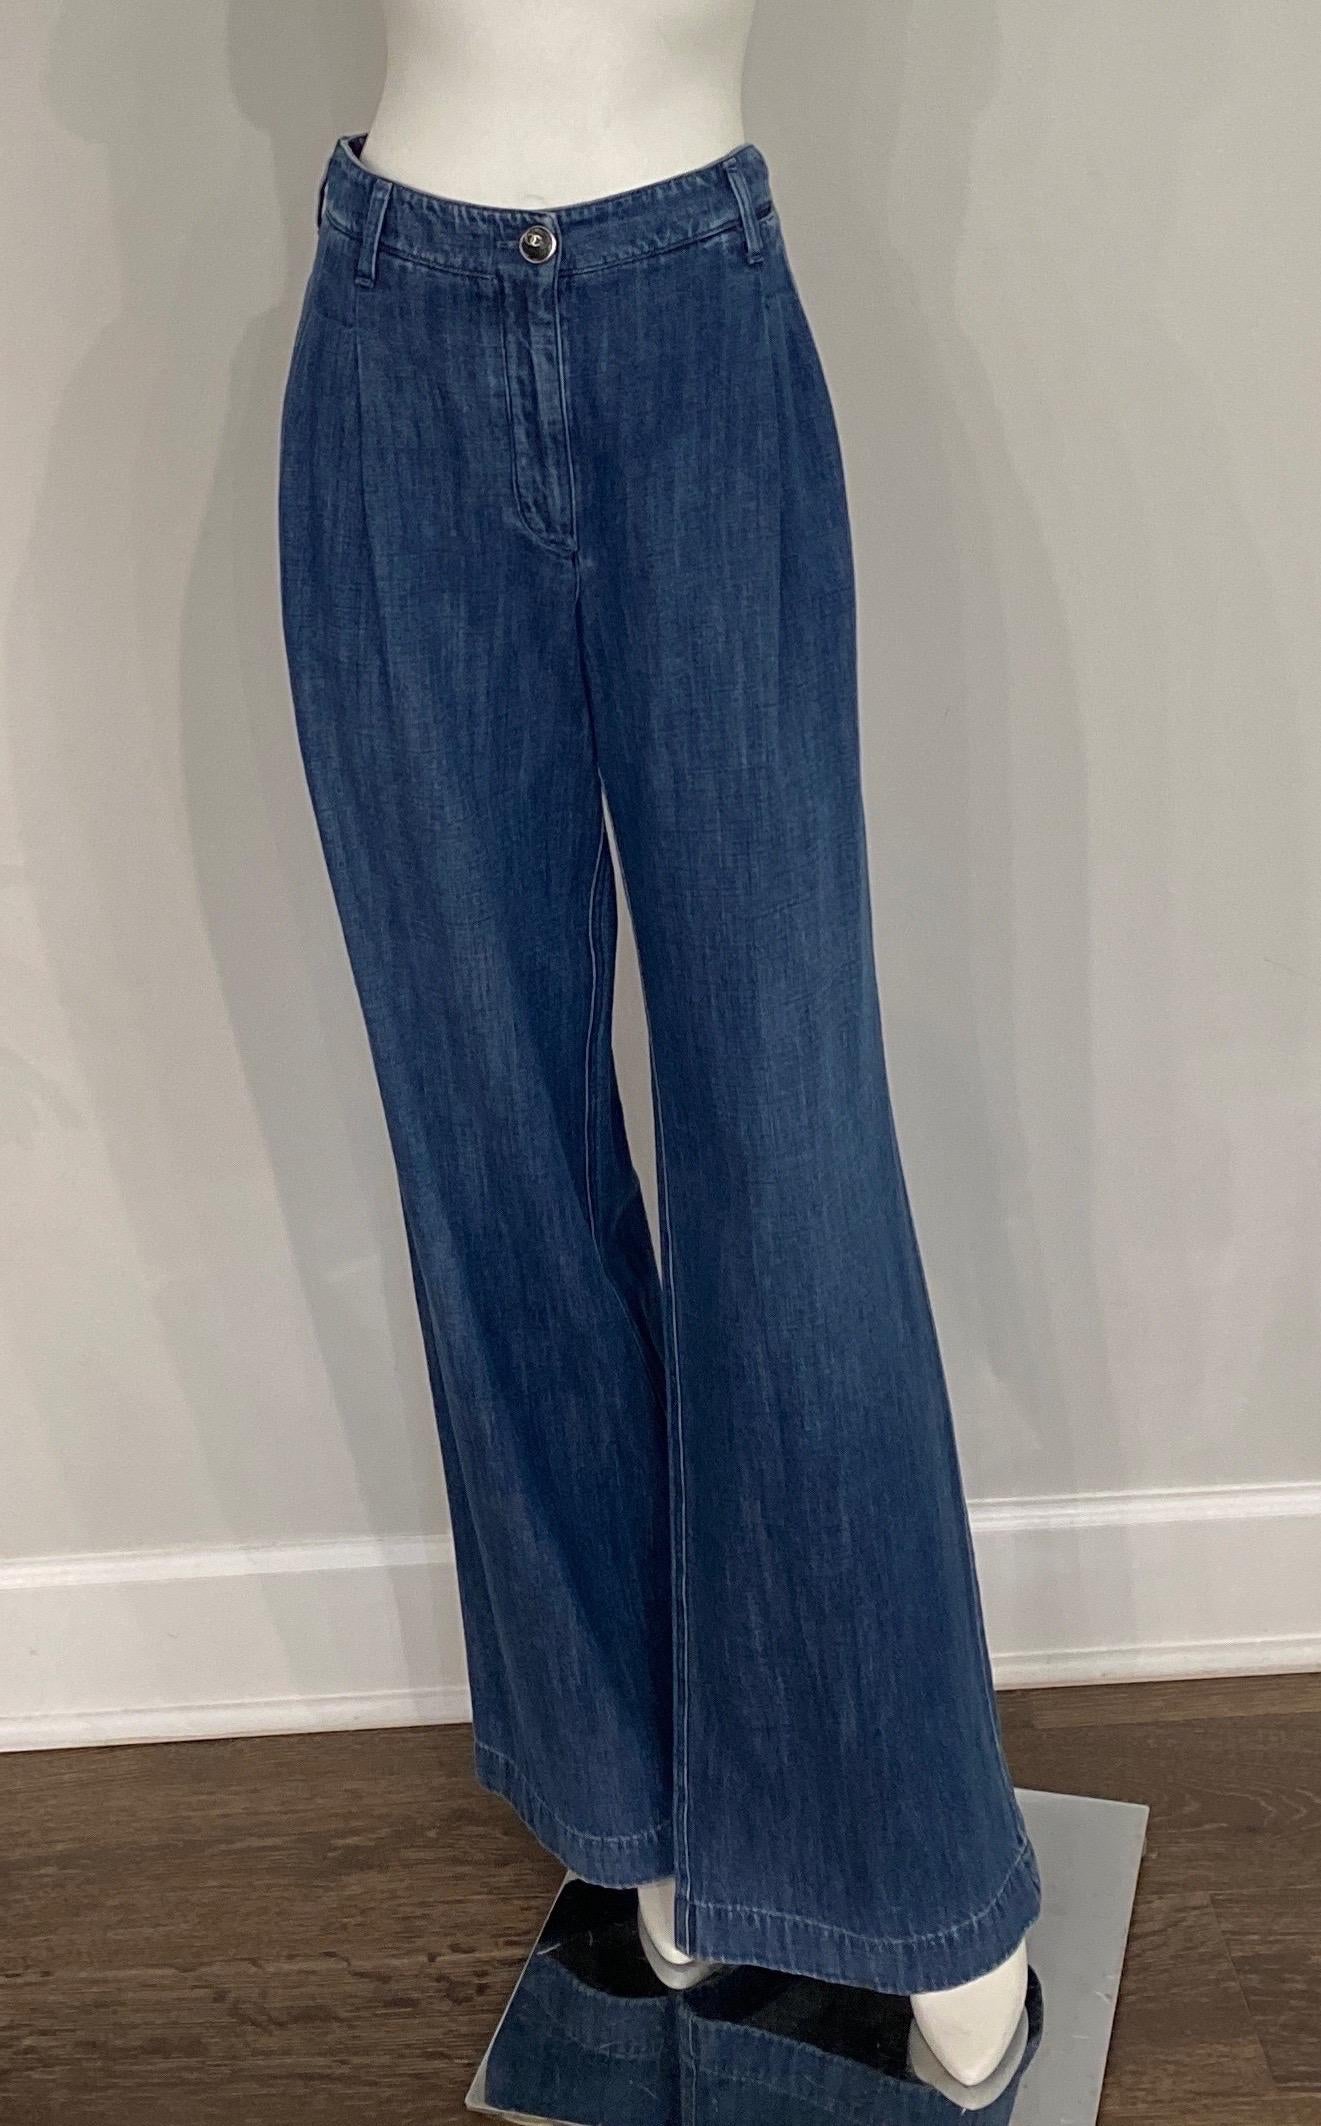 Chanel Double Pleated Flare Cotton Denim Pants-Size 42-2008P These jean pants are NWT, never worn and are made of a lightweight cotton. The pants have double pleats on each side, a front zipper with a top button closure. The button is made of a